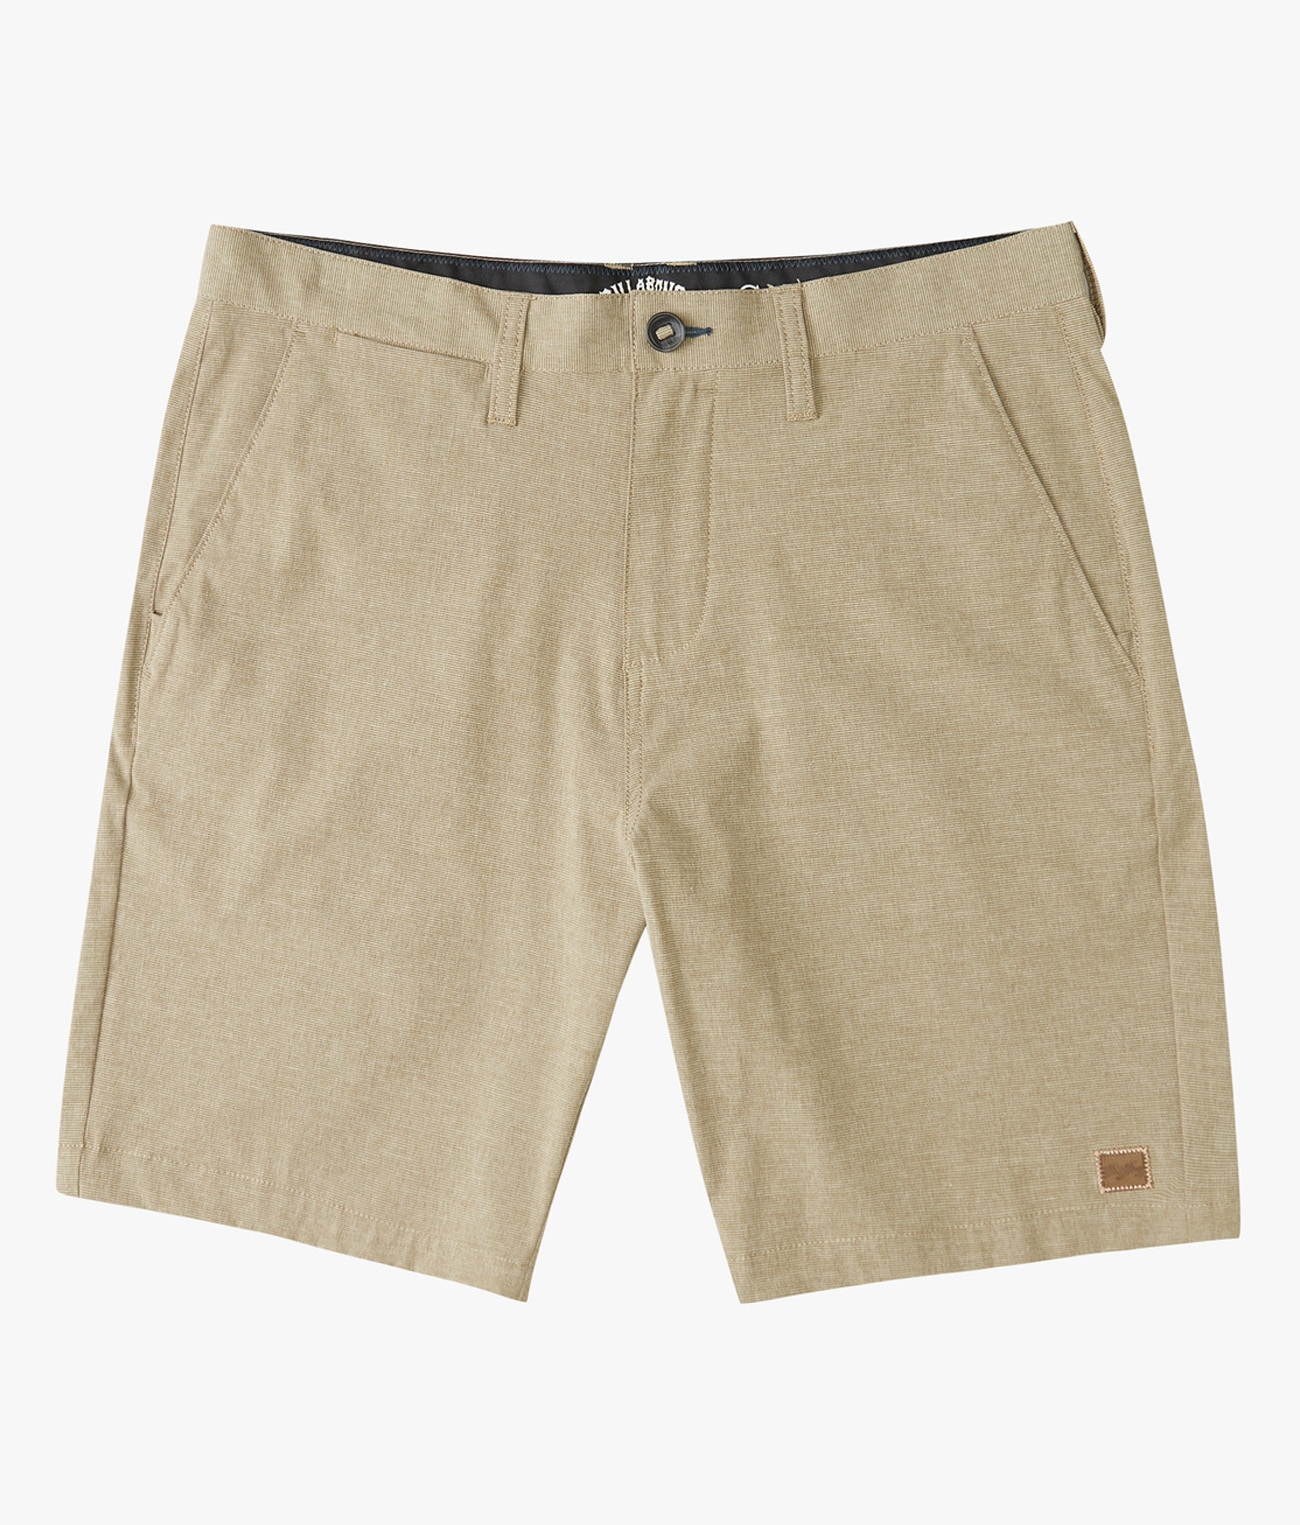 Crossfire Mid Submersible Short